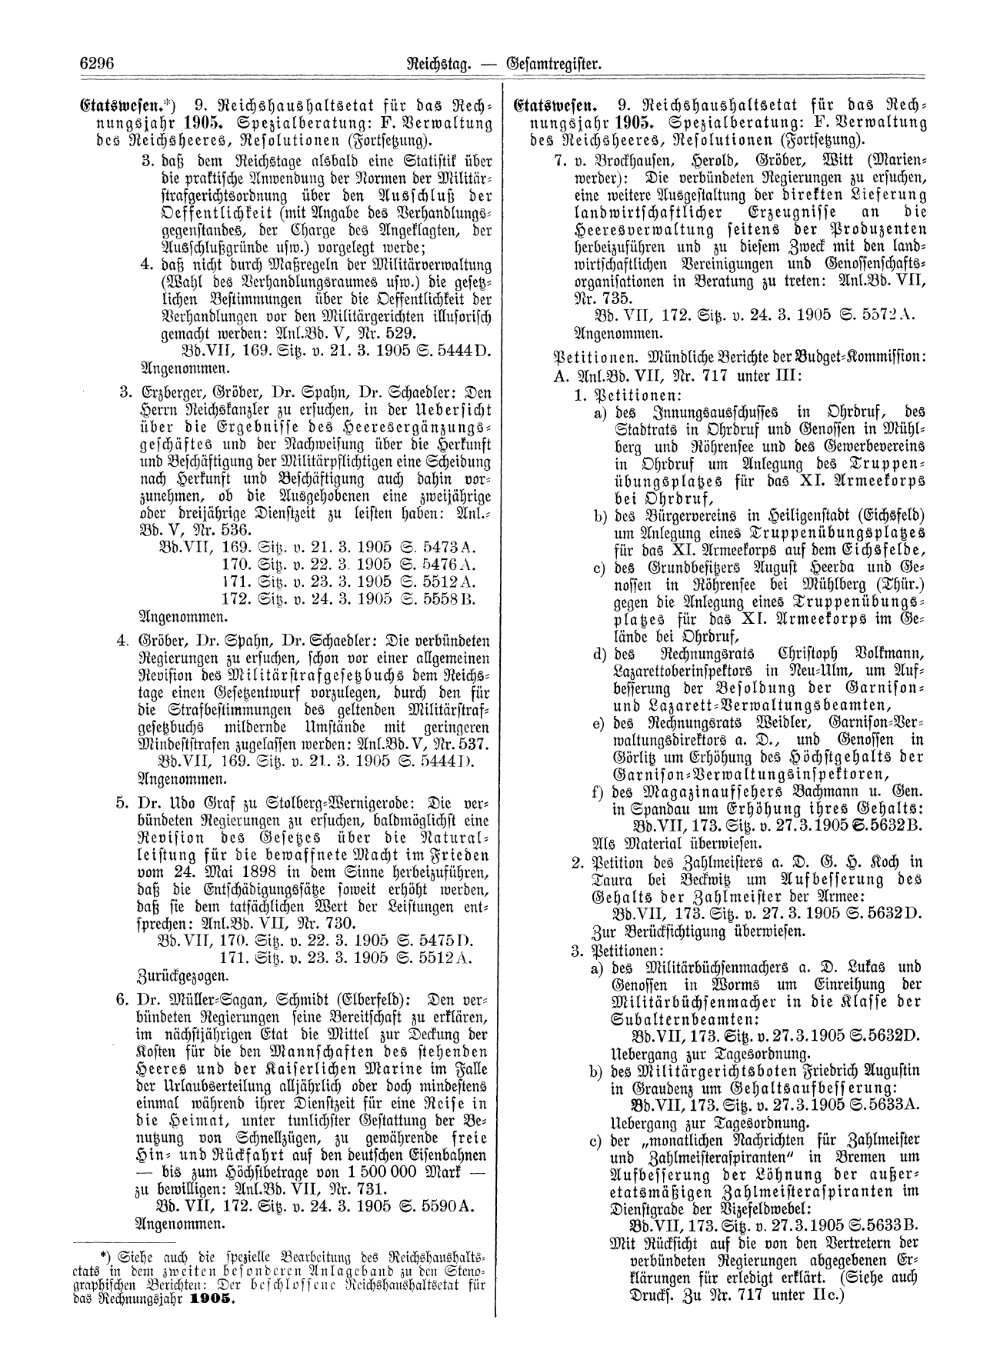 Scan of page 6296